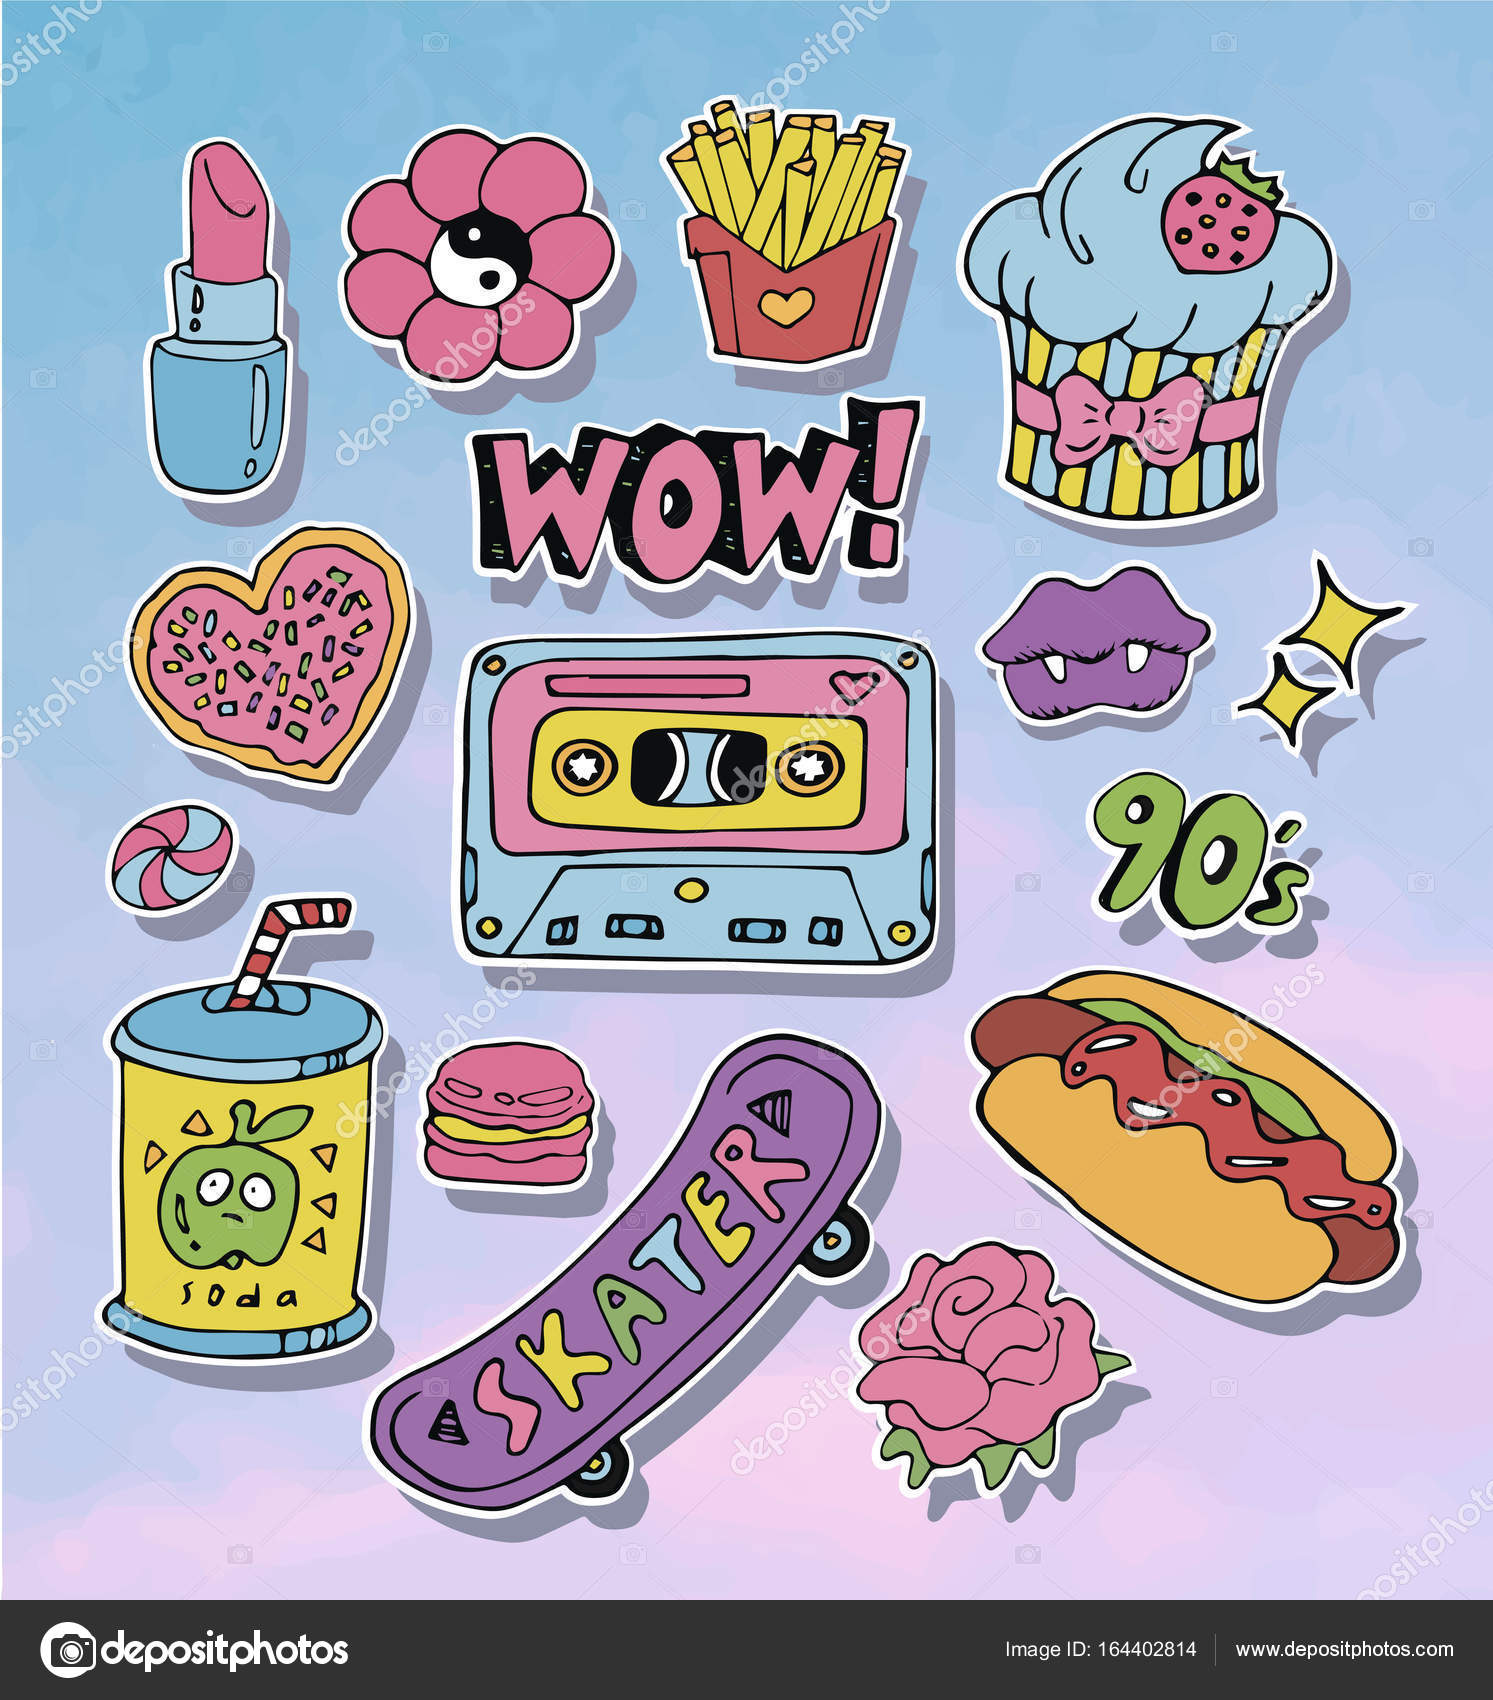 Cartoon stickers or patches set with 90s style design elements